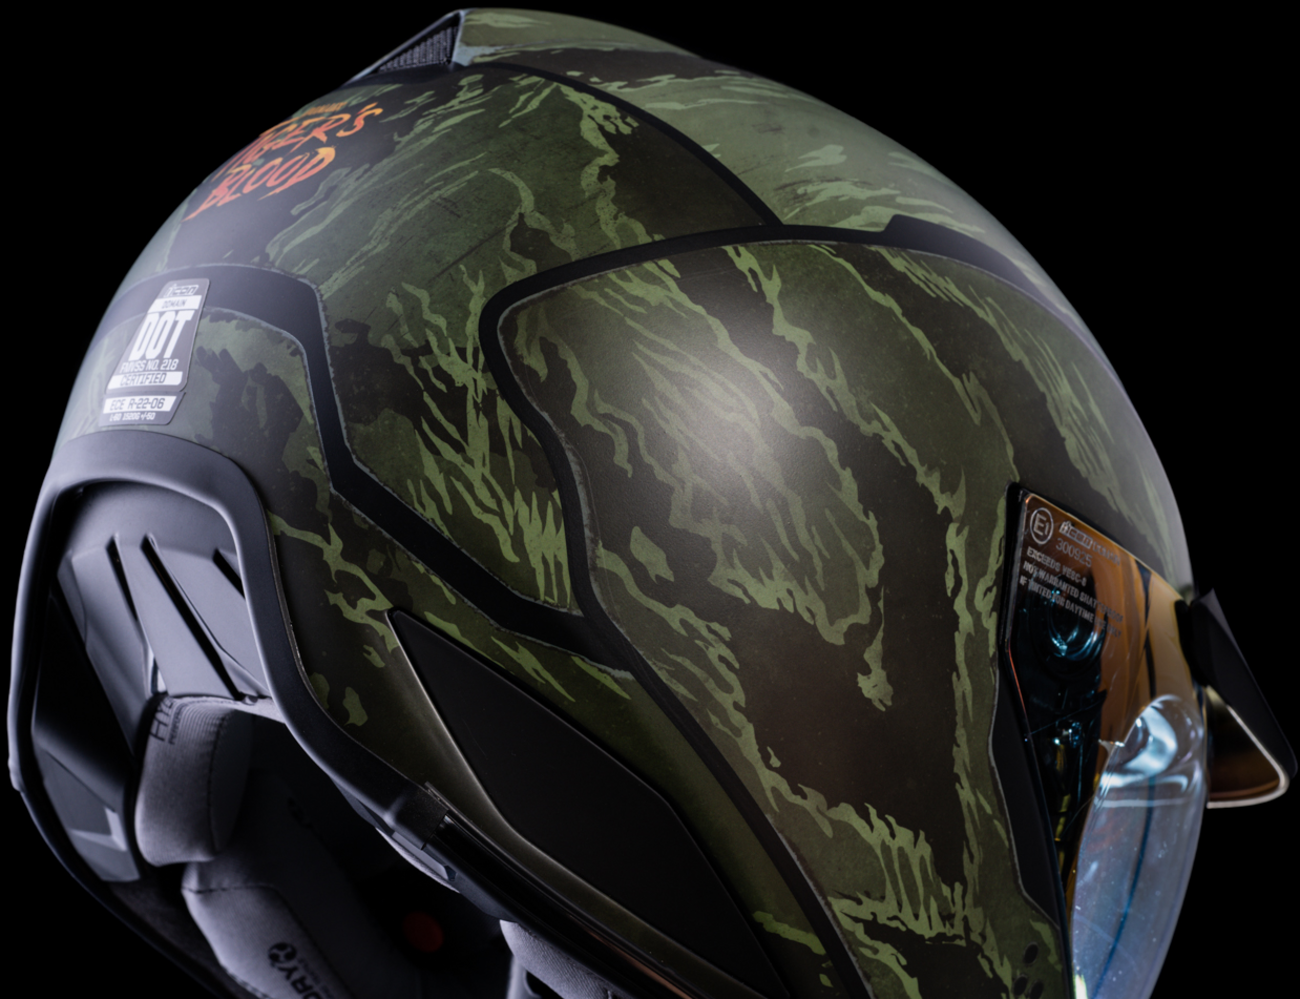 ICON Domain™ Helmet - Tiger's Blood - Green - Large 0101-14926